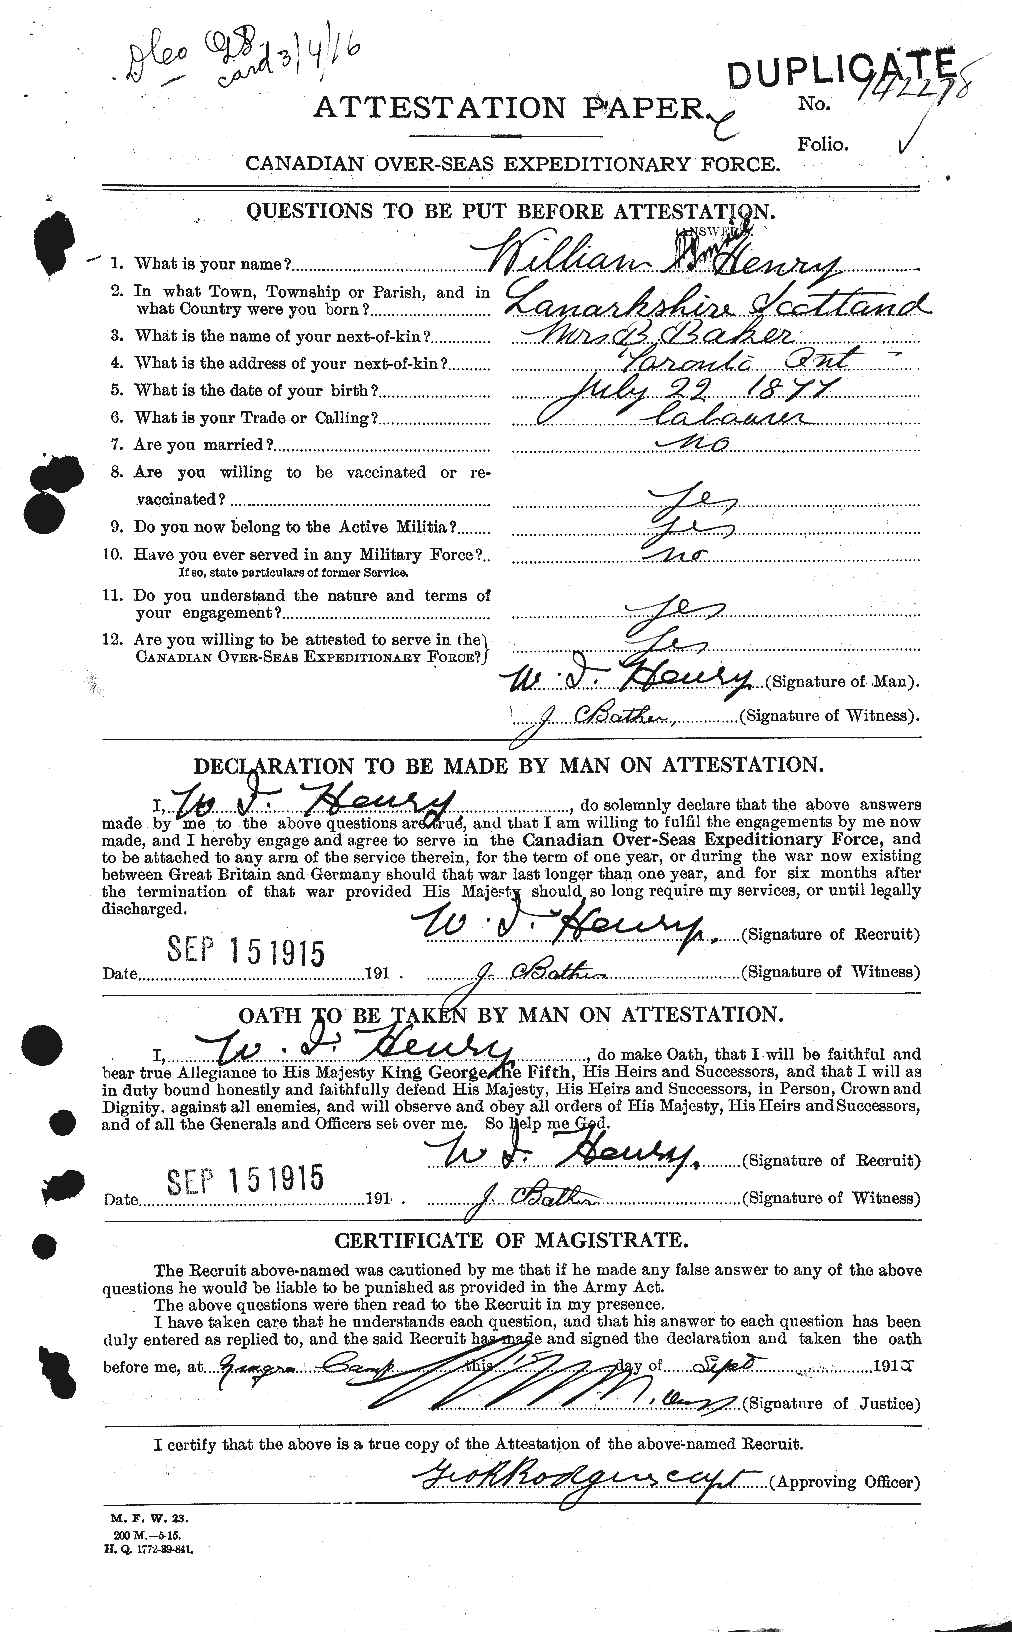 Personnel Records of the First World War - CEF 387778a